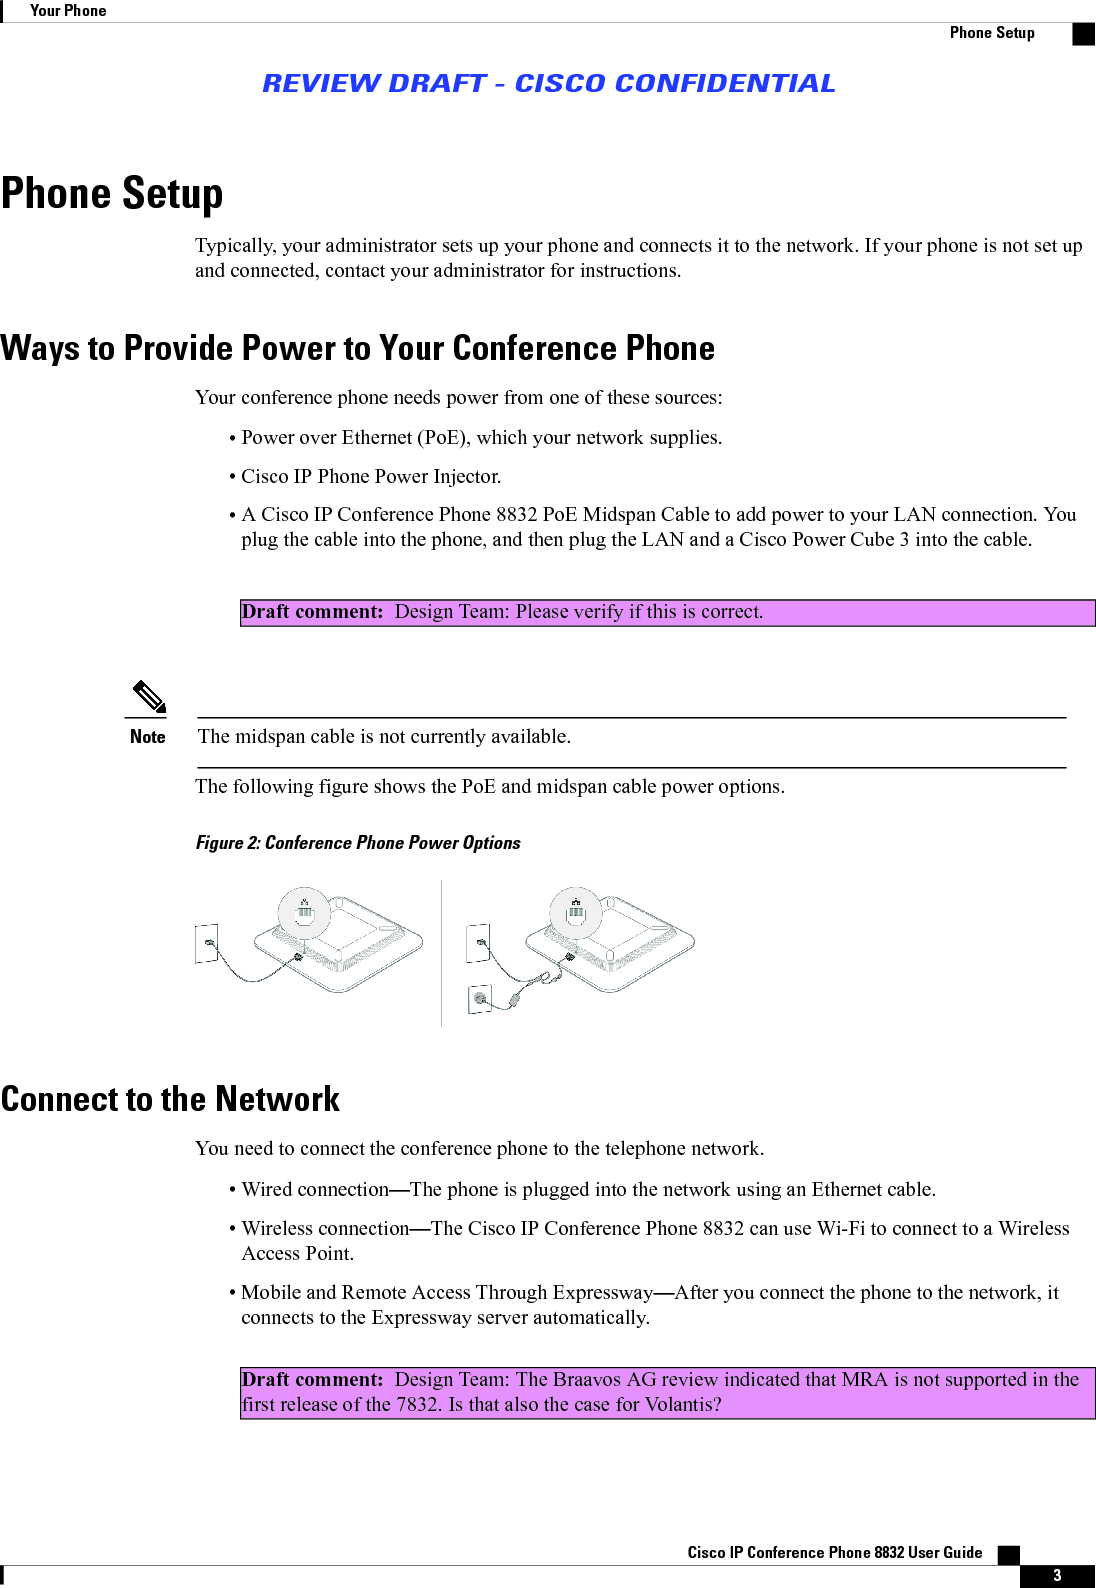 Phone SetupTypically, your administrator sets up your phone and connects it to the network. If your phone is not set upand connected, contact your administrator for instructions.Ways to Provide Power to Your Conference PhoneYour conference phone needs power from one of these sources:•Power over Ethernet (PoE), which your network supplies.•Cisco IP Phone Power Injector.•A Cisco IP Conference Phone 8832 PoE Midspan Cable to add power to your LAN connection. Youplug the cable into the phone, and then plug the LAN and a Cisco Power Cube 3 into the cable.Draft comment: Design Team: Please verify if this is correct.The midspan cable is not currently available.NoteThe following figure shows the PoE and midspan cable power options.Figure 2: Conference Phone Power OptionsConnect to the NetworkYou need to connect the conference phone to the telephone network.•Wired connection—The phone is plugged into the network using an Ethernet cable.•Wireless connection—The Cisco IP Conference Phone 8832 can use Wi-Fi to connect to a WirelessAccess Point.•Mobile and Remote Access Through Expressway—After you connect the phone to the network, itconnects to the Expressway server automatically.Draft comment: Design Team: The Braavos AG review indicated that MRA is not supported in thefirst release of the 7832. Is that also the case for Volantis?Cisco IP Conference Phone 8832 User Guide    3Your PhonePhone SetupREVIEW DRAFT - CISCO CONFIDENTIAL